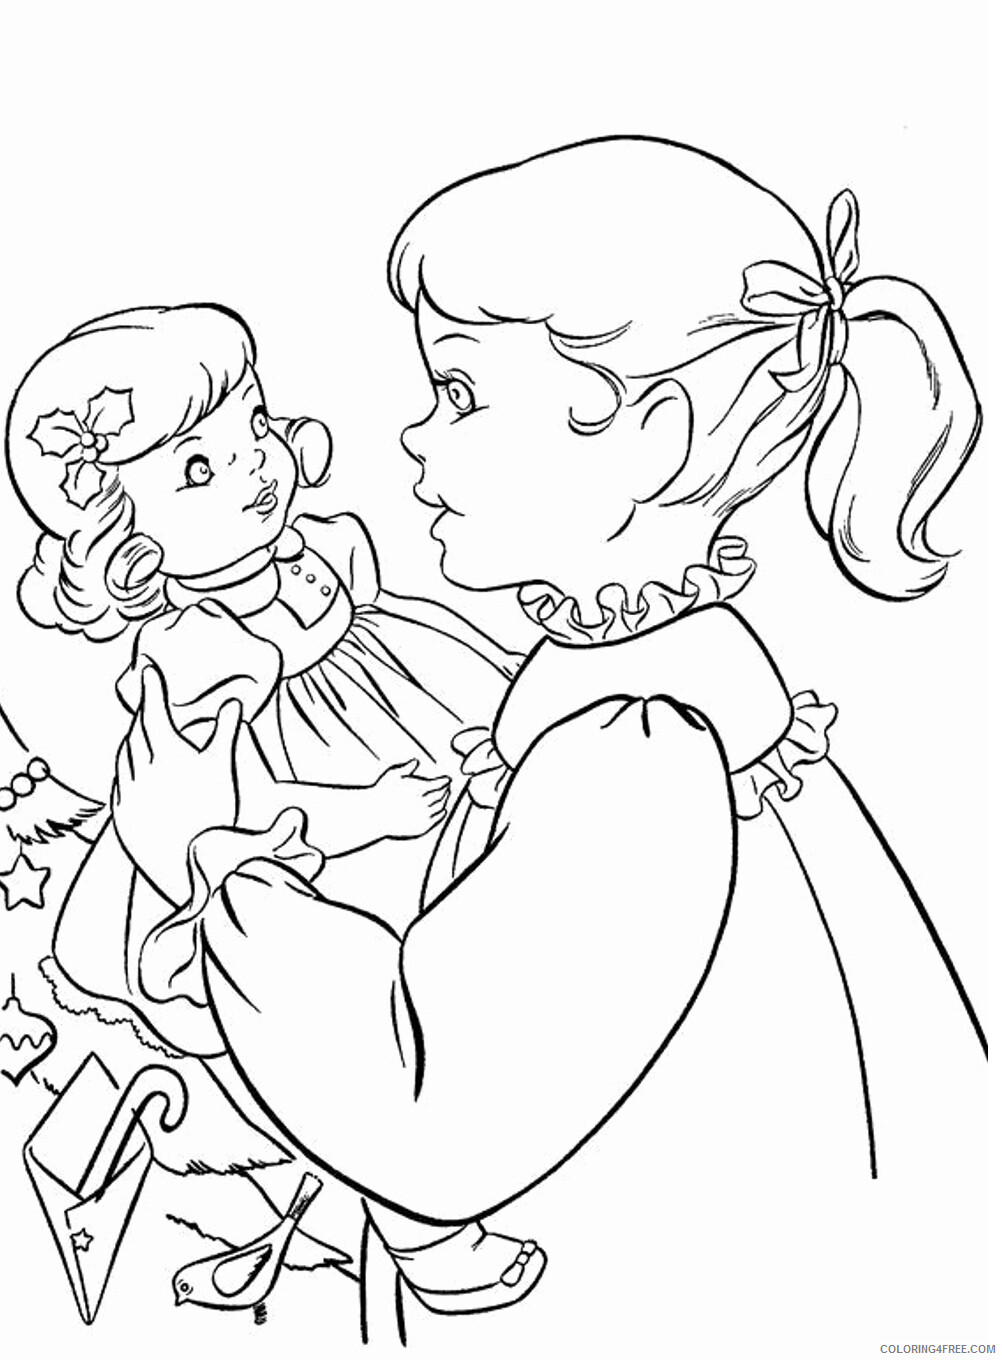 American Girl Doll Coloring Pages for Girls Girl and Doll Printable 2021 0020 Coloring4free